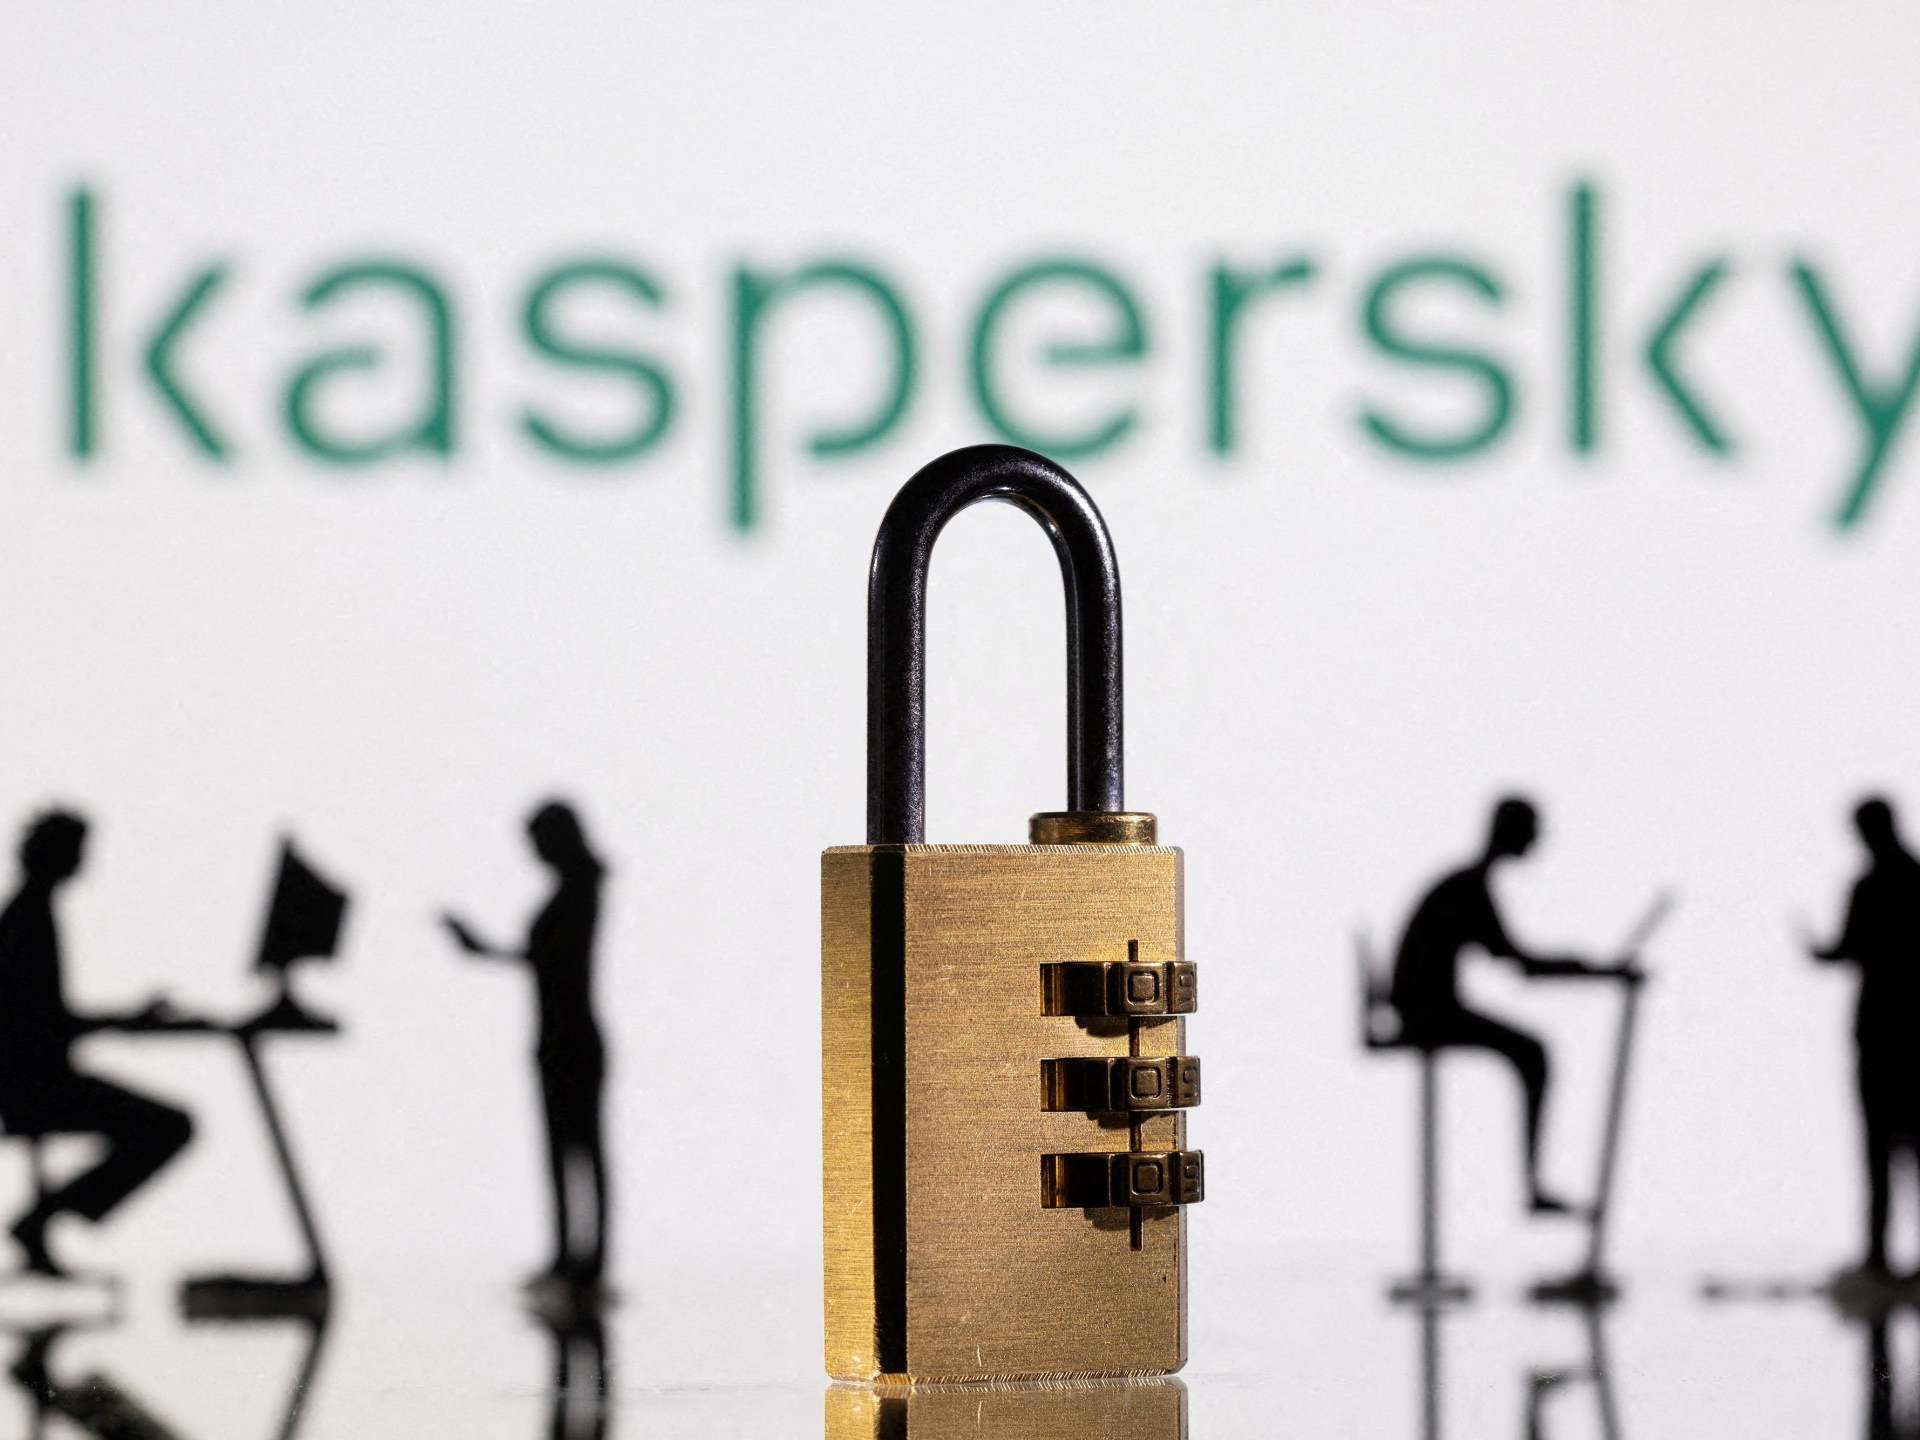 US imposes sanctions on leaders of Russias AO Kaspersky Lab | Technology News [Video]